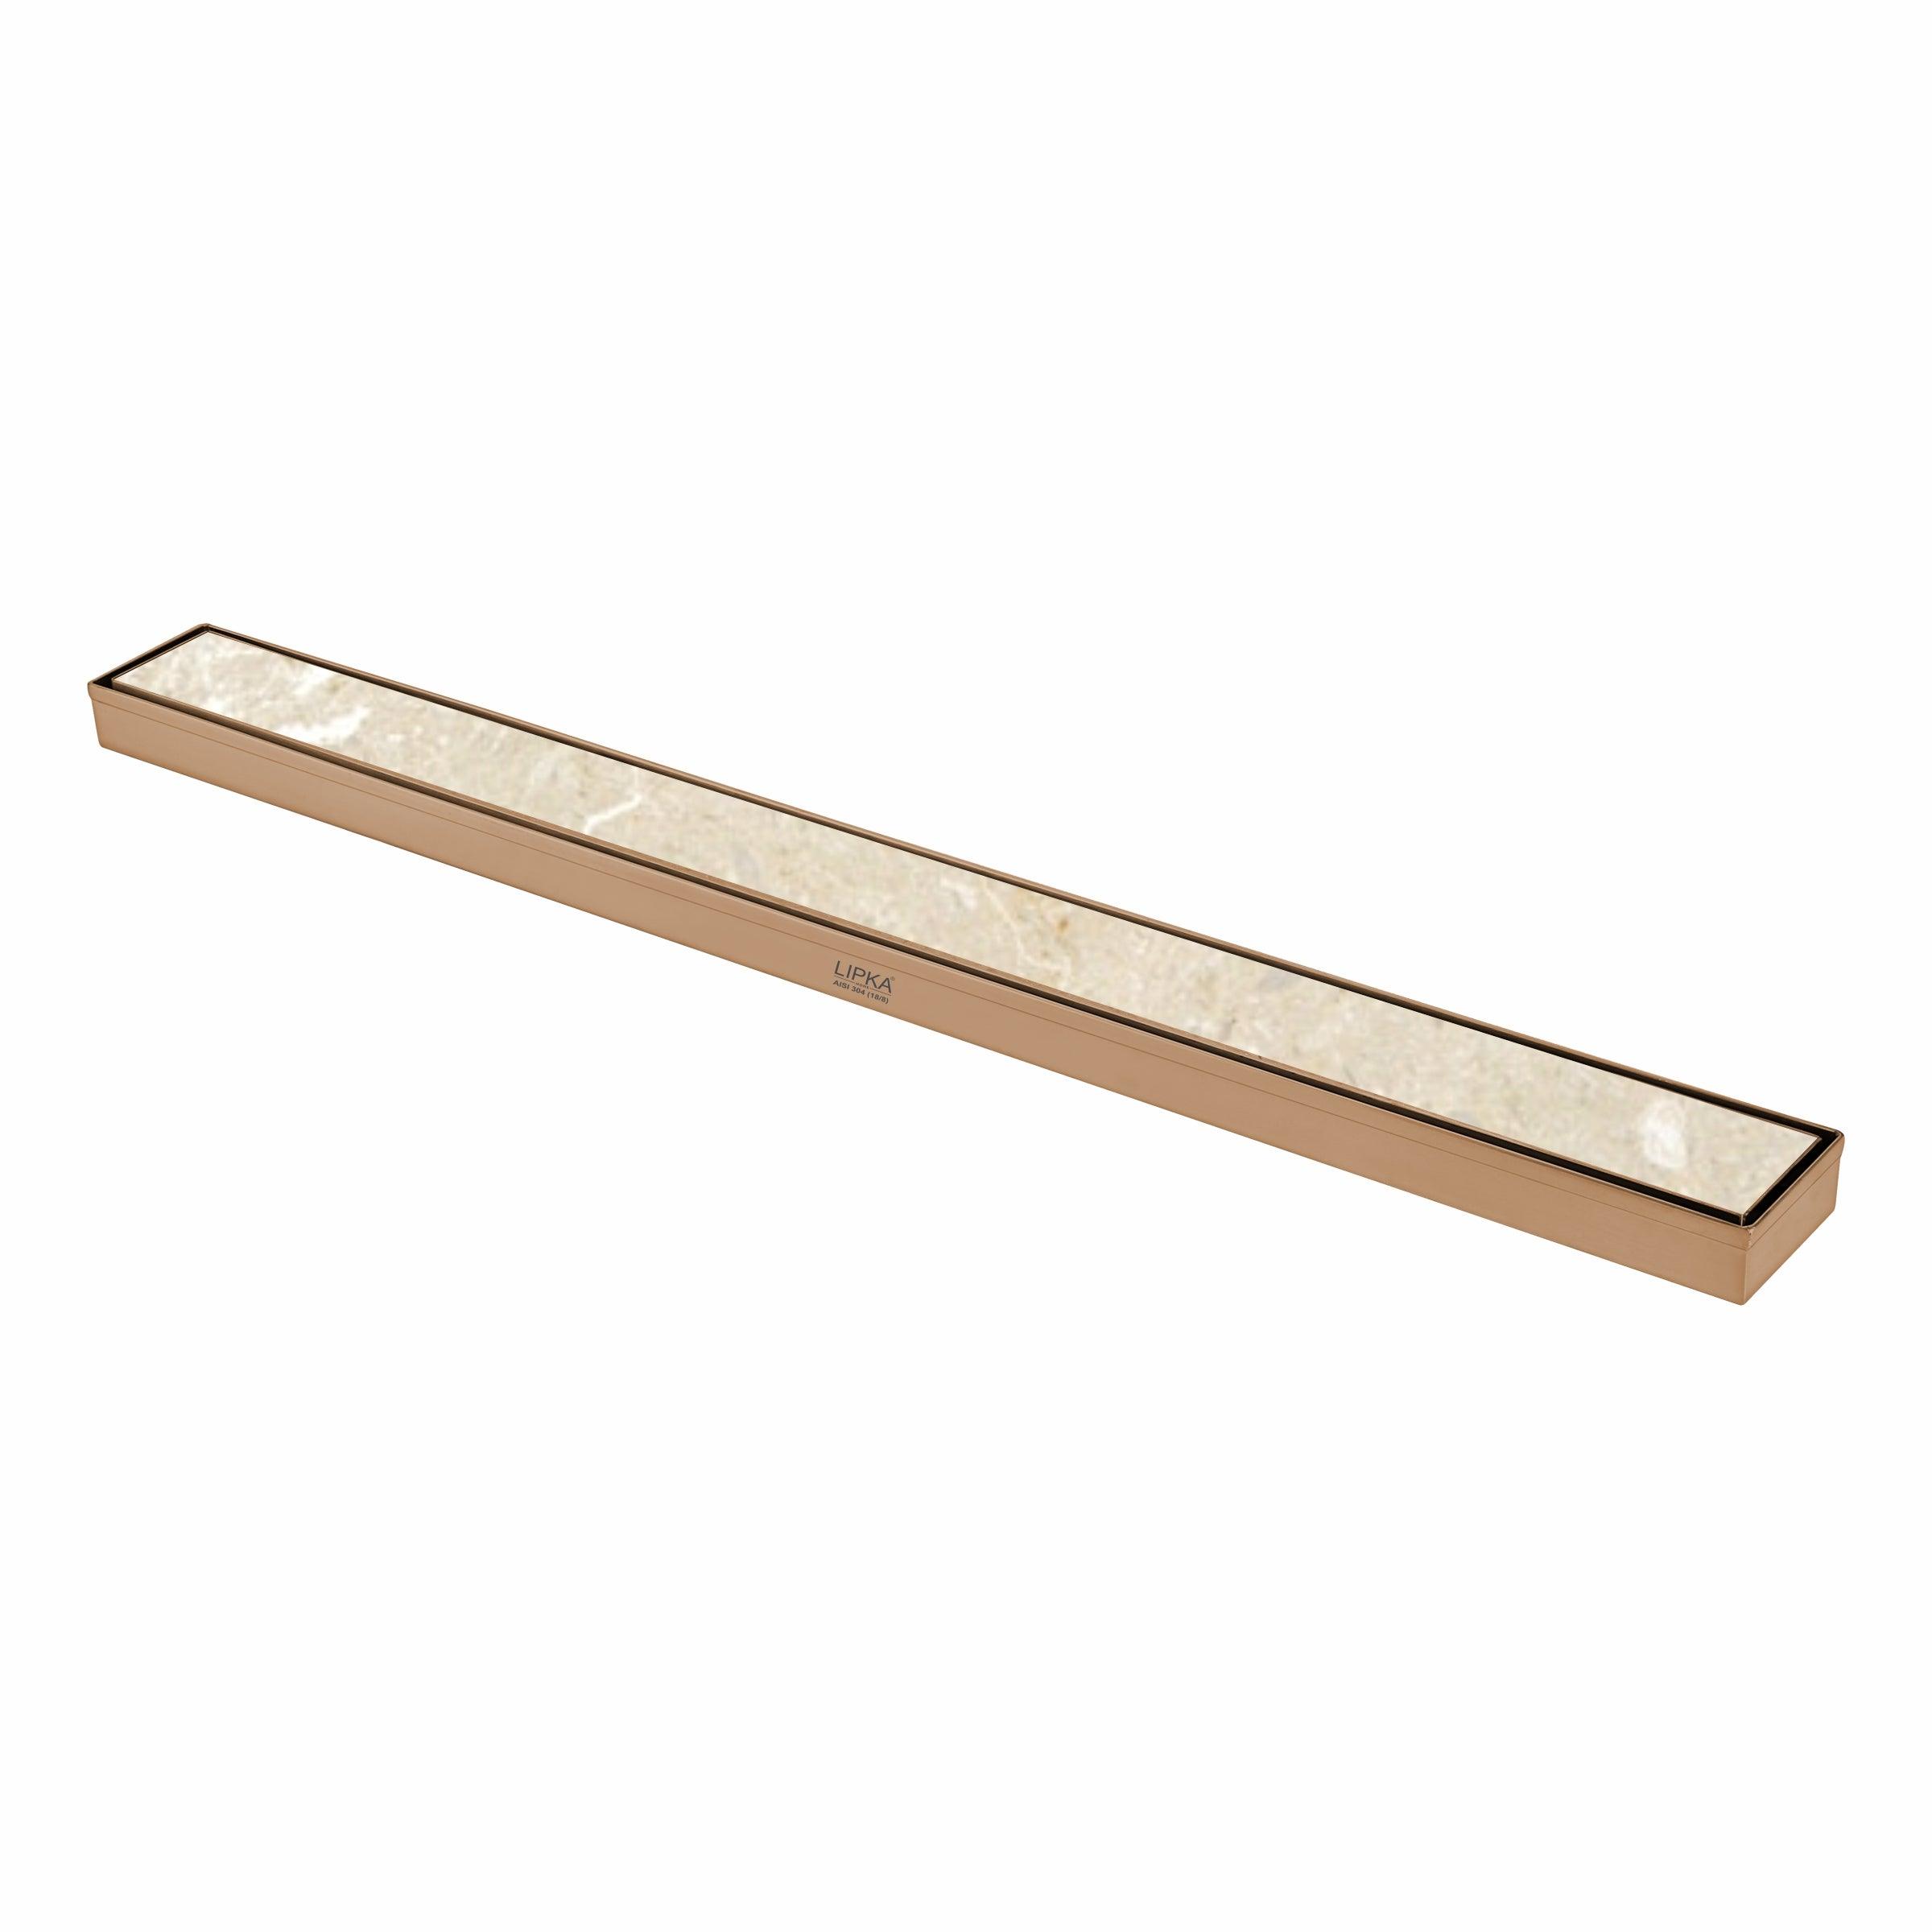 Tile Insert Shower Drain Channel - Yellow Gold (36 x 2 Inches)